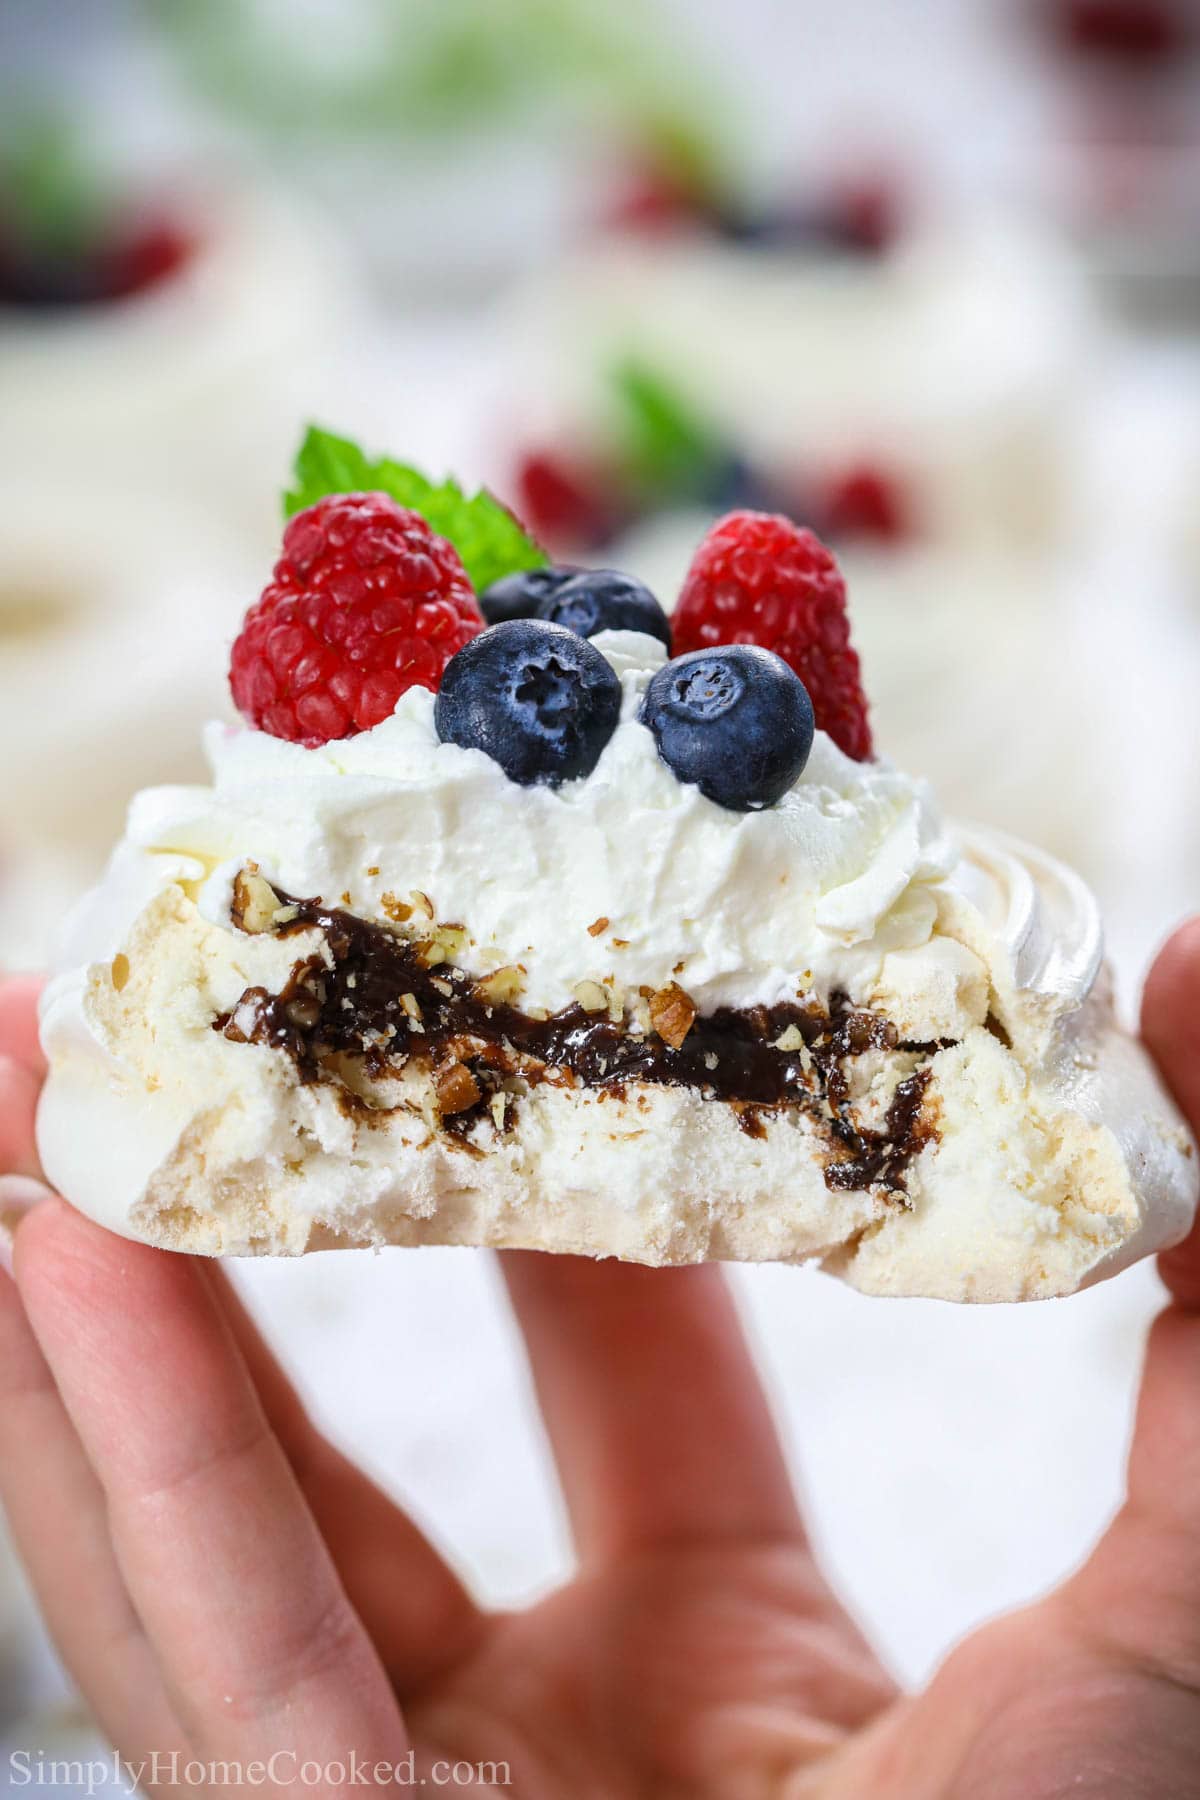 Mini Pavlova with Chocolate and pecans and topped with whipped cream and berries, missing a bite and being held in a hand